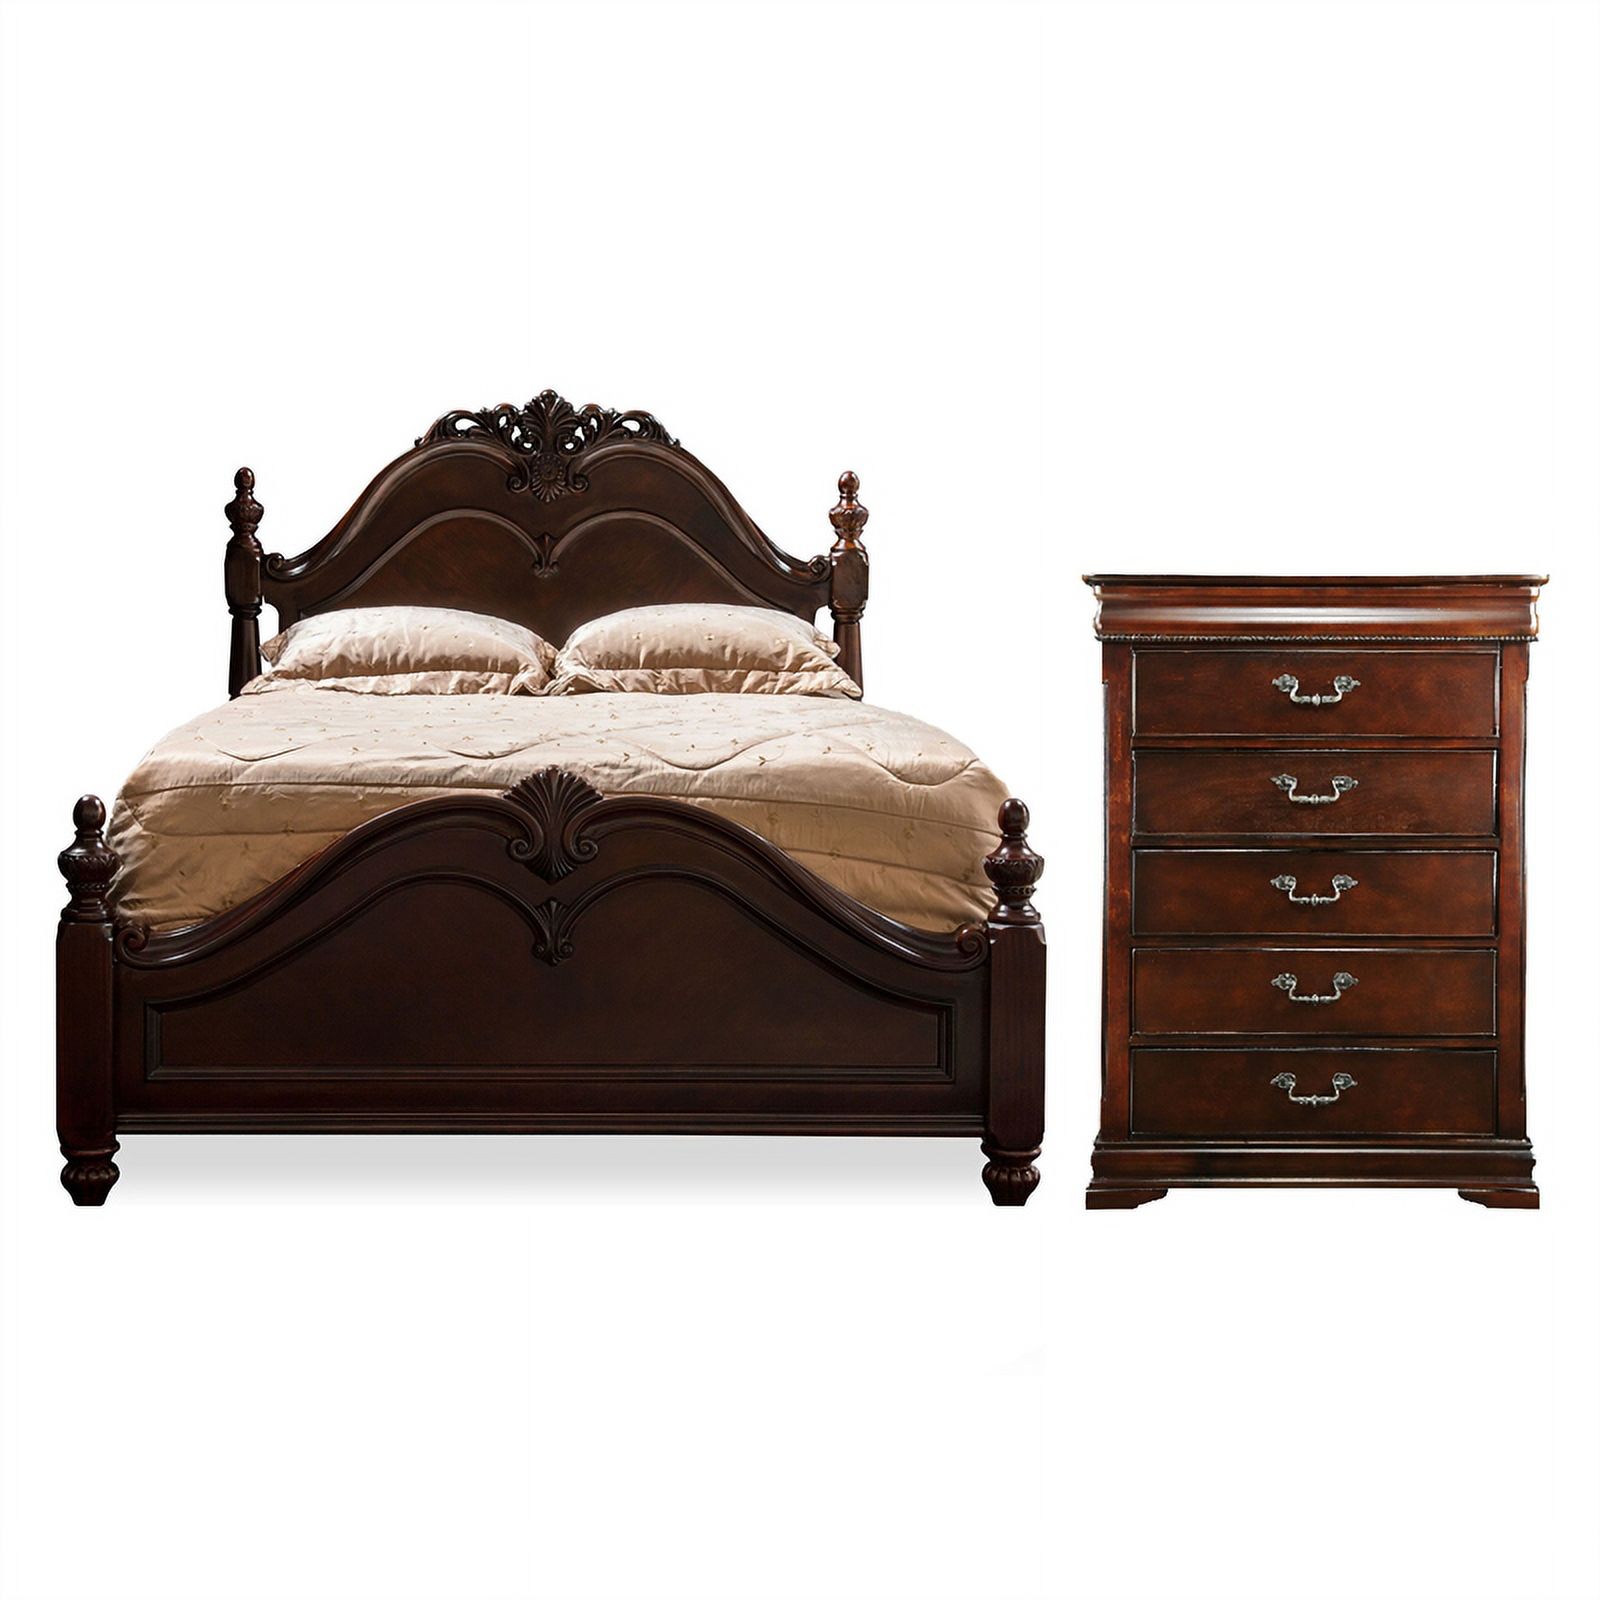 Ruben 2-Piece Cherry Wood Queen Poster Bed and 5-Drawer Chest Set - image 1 of 13